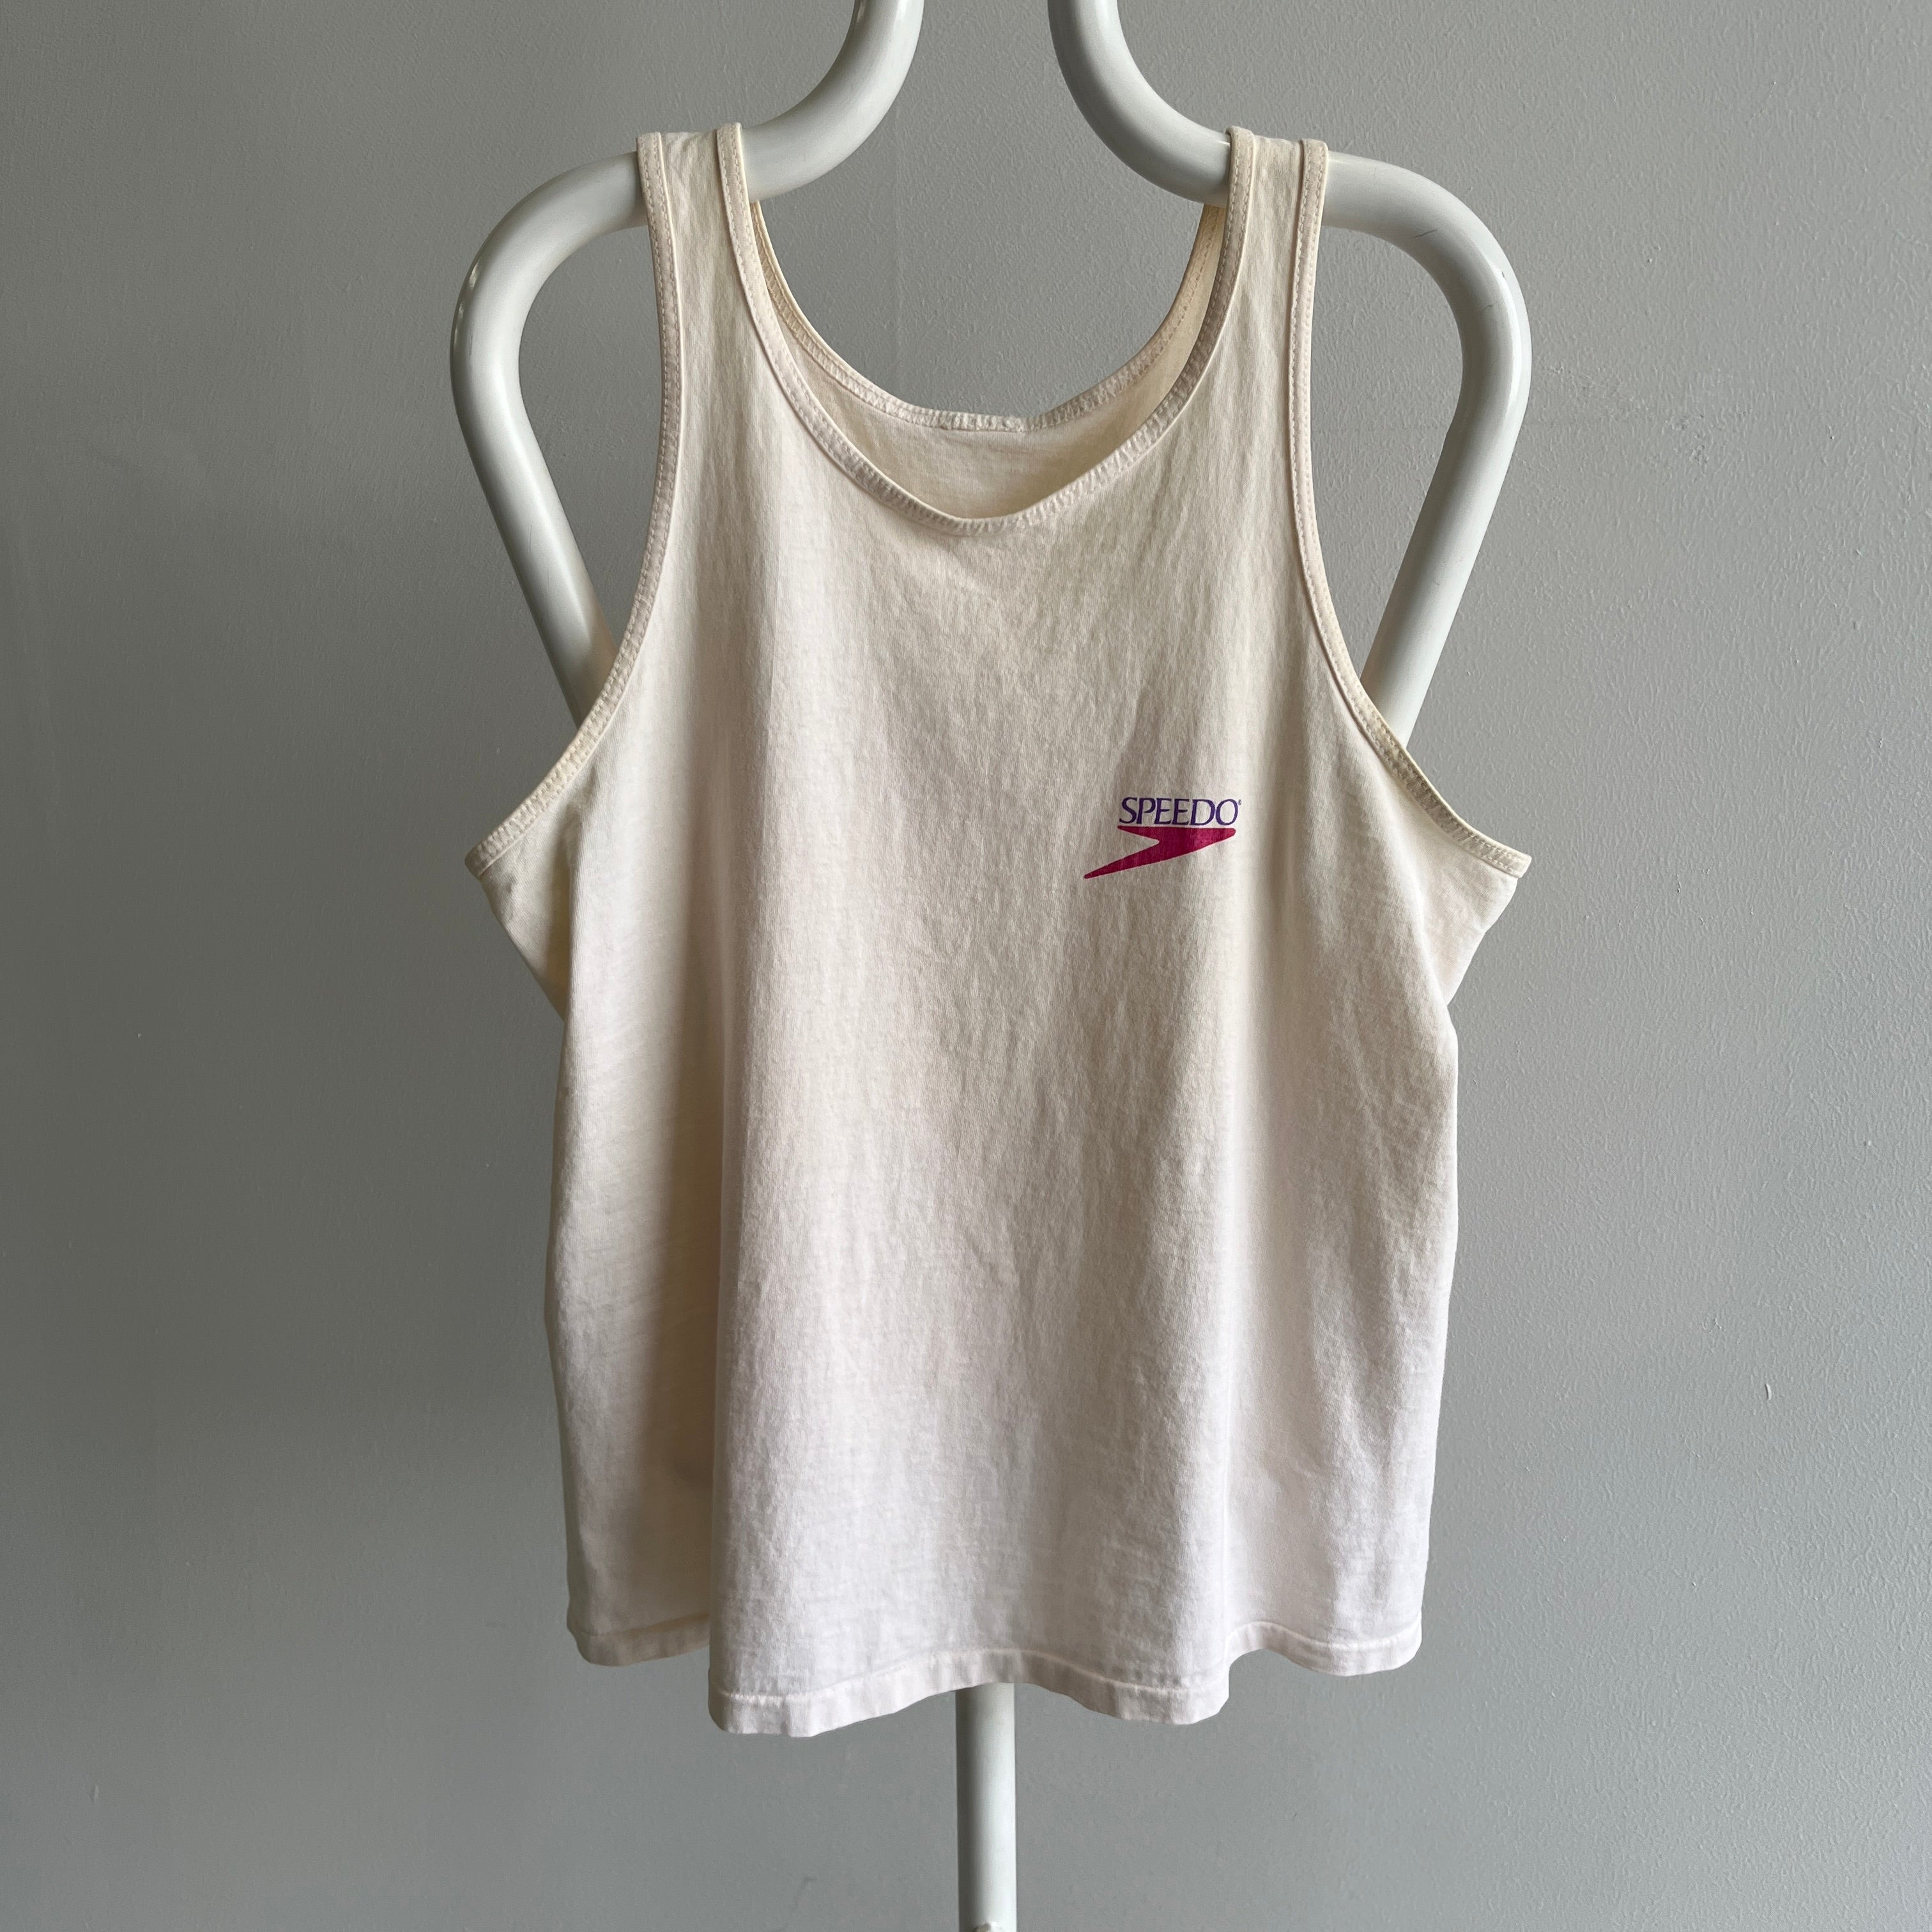 1980s Karch Kiraly Volleyball Speedo Natural Colored Cotton Tank Top - THE BACKSIDE!!